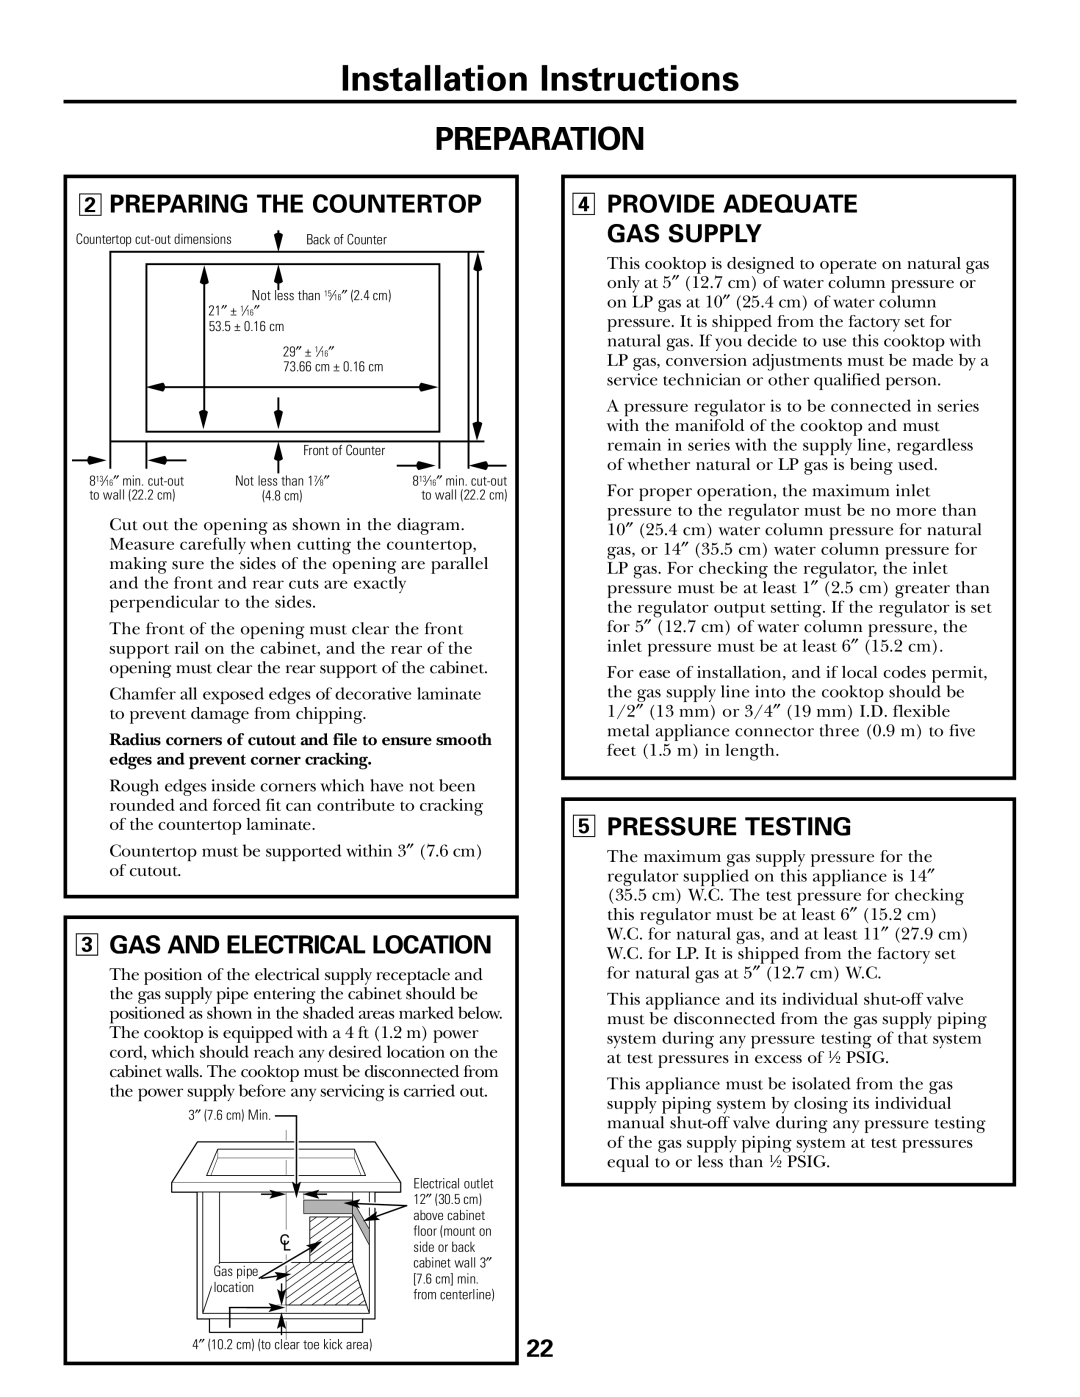 GE JGP990 manual Installation Instructions, Preparation, 2PREPARING THE COUNTERTOP, 3GAS AND ELECTRICAL LOCATION 